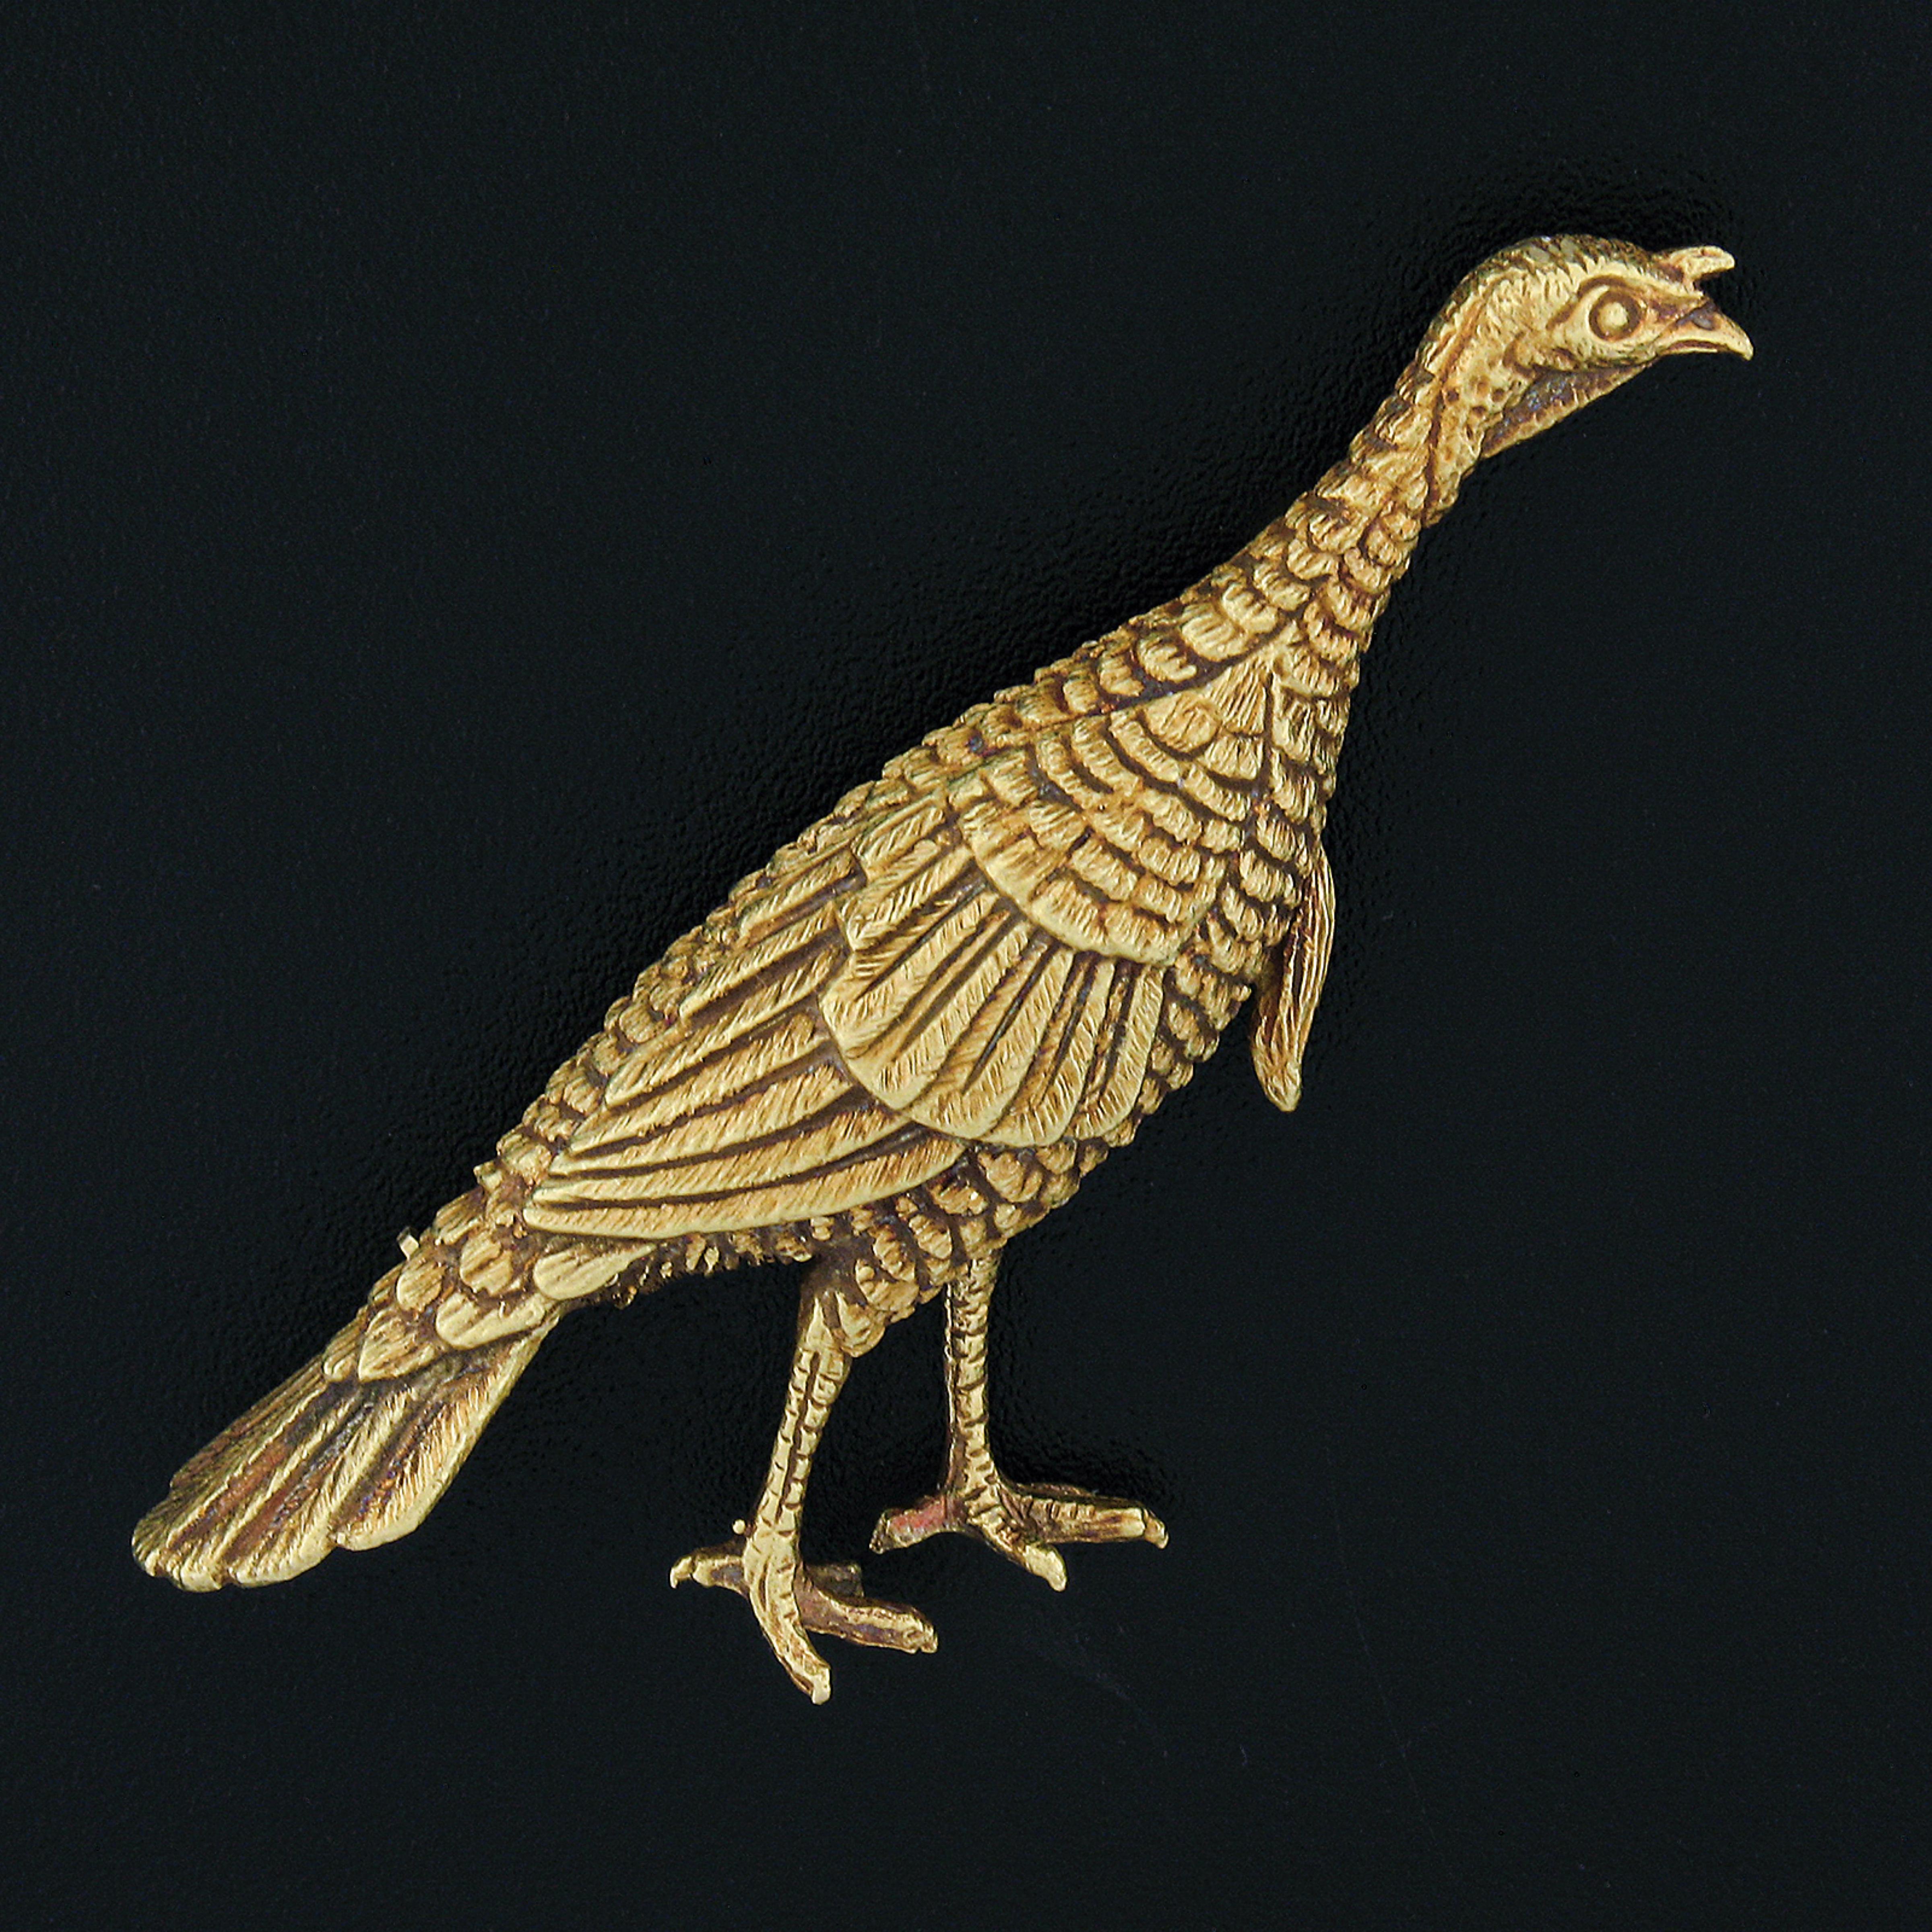 This incredible and very well made vintage pin brooch is crafted in solid 18k yellow gold. It features a perfectly structured 3D turkey design with remarkably outstanding workmanship and texture that bring out maximum detailing granting a truly